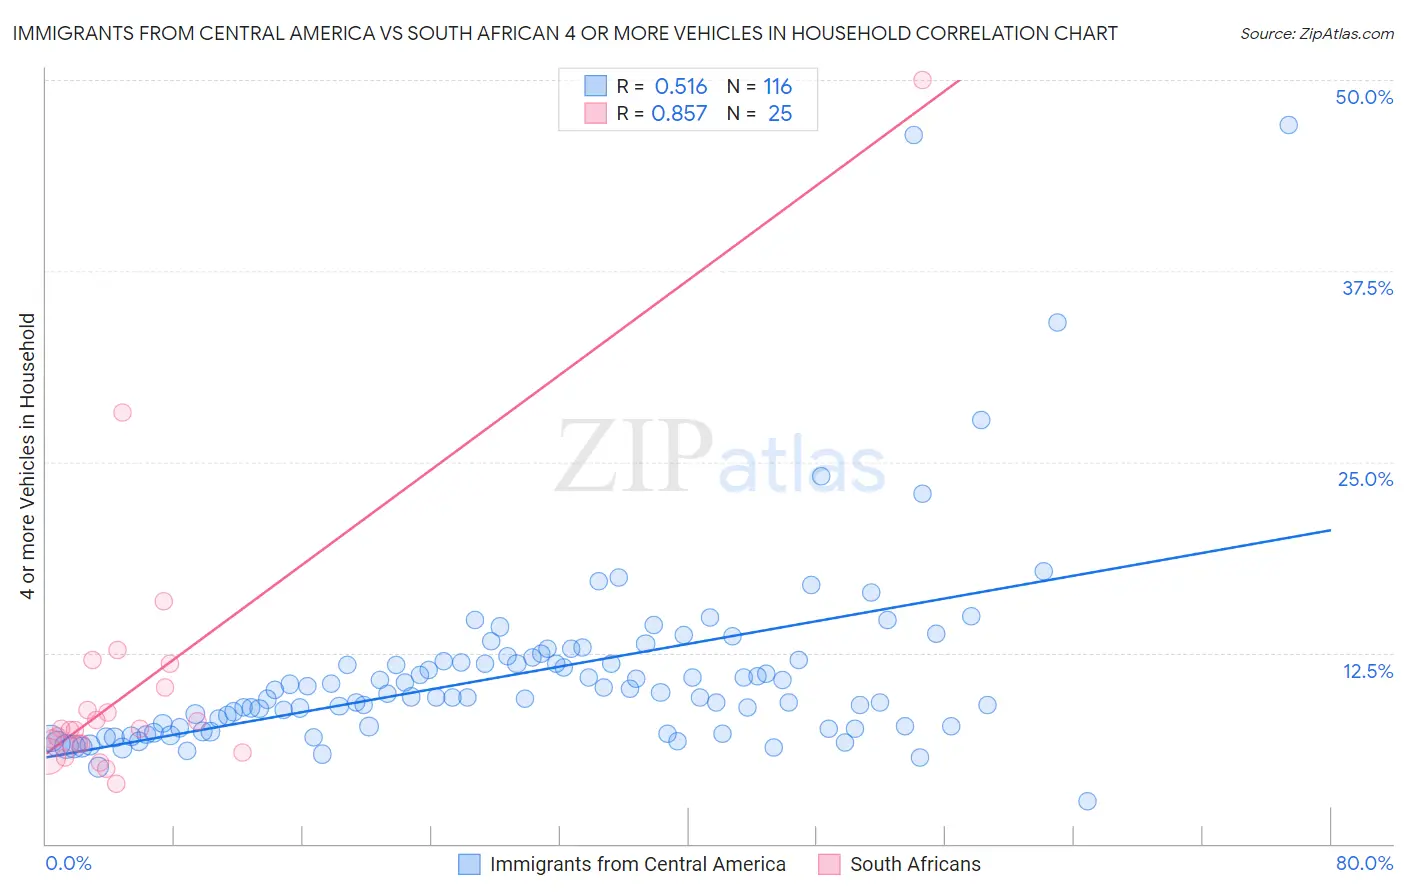 Immigrants from Central America vs South African 4 or more Vehicles in Household